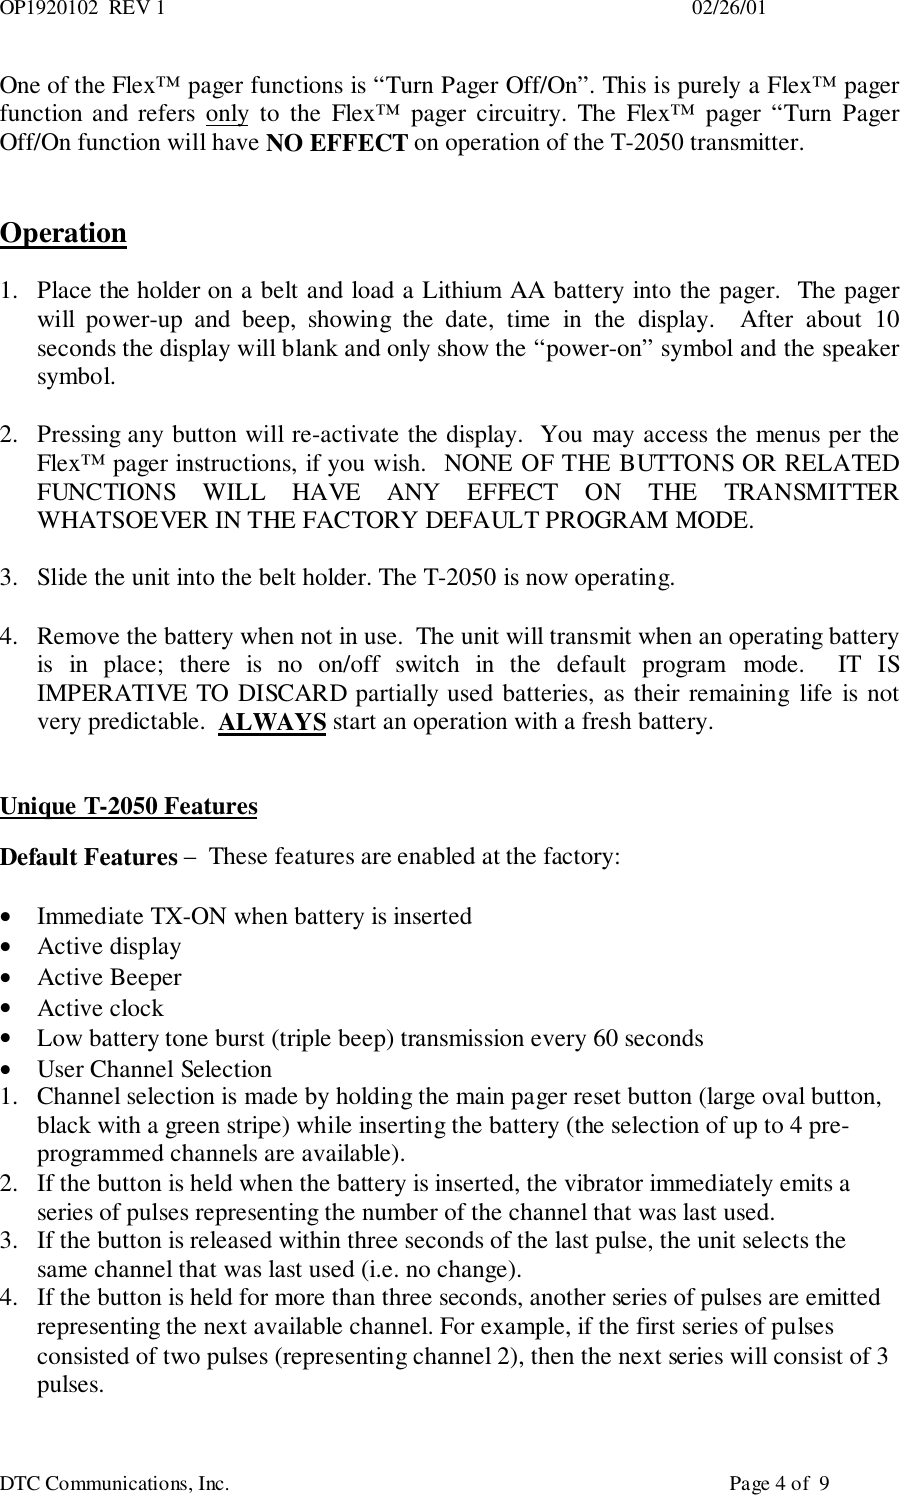 OP1920102  REV 1                                                                                                     02/26/01DTC Communications, Inc.                                                                                                Page 4 of  9One of the Flex™ pager functions is “Turn Pager Off/On”. This is purely a Flex™ pagerfunction and refers only to the Flex™ pager circuitry. The Flex™ pager “Turn PagerOff/On function will have NO EFFECT on operation of the T-2050 transmitter.Operation1. Place the holder on a belt and load a Lithium AA battery into the pager.  The pagerwill power-up and beep, showing the date, time in the display.  After about 10seconds the display will blank and only show the “power-on” symbol and the speakersymbol.2. Pressing any button will re-activate the display.  You may access the menus per theFlex™ pager instructions, if you wish.  NONE OF THE BUTTONS OR RELATEDFUNCTIONS WILL HAVE ANY EFFECT ON THE TRANSMITTERWHATSOEVER IN THE FACTORY DEFAULT PROGRAM MODE.3. Slide the unit into the belt holder. The T-2050 is now operating.4. Remove the battery when not in use.  The unit will transmit when an operating batteryis in place; there is no on/off switch in the default program mode.  IT ISIMPERATIVE TO DISCARD partially used batteries, as their remaining life is notvery predictable.  ALWAYS start an operation with a fresh battery.Unique T-2050 FeaturesDefault Features –  These features are enabled at the factory:• Immediate TX-ON when battery is inserted• Active display• Active Beeper• Active clock• Low battery tone burst (triple beep) transmission every 60 seconds• User Channel Selection1. Channel selection is made by holding the main pager reset button (large oval button,black with a green stripe) while inserting the battery (the selection of up to 4 pre-programmed channels are available).2. If the button is held when the battery is inserted, the vibrator immediately emits aseries of pulses representing the number of the channel that was last used.3. If the button is released within three seconds of the last pulse, the unit selects thesame channel that was last used (i.e. no change).4. If the button is held for more than three seconds, another series of pulses are emittedrepresenting the next available channel. For example, if the first series of pulsesconsisted of two pulses (representing channel 2), then the next series will consist of 3pulses.